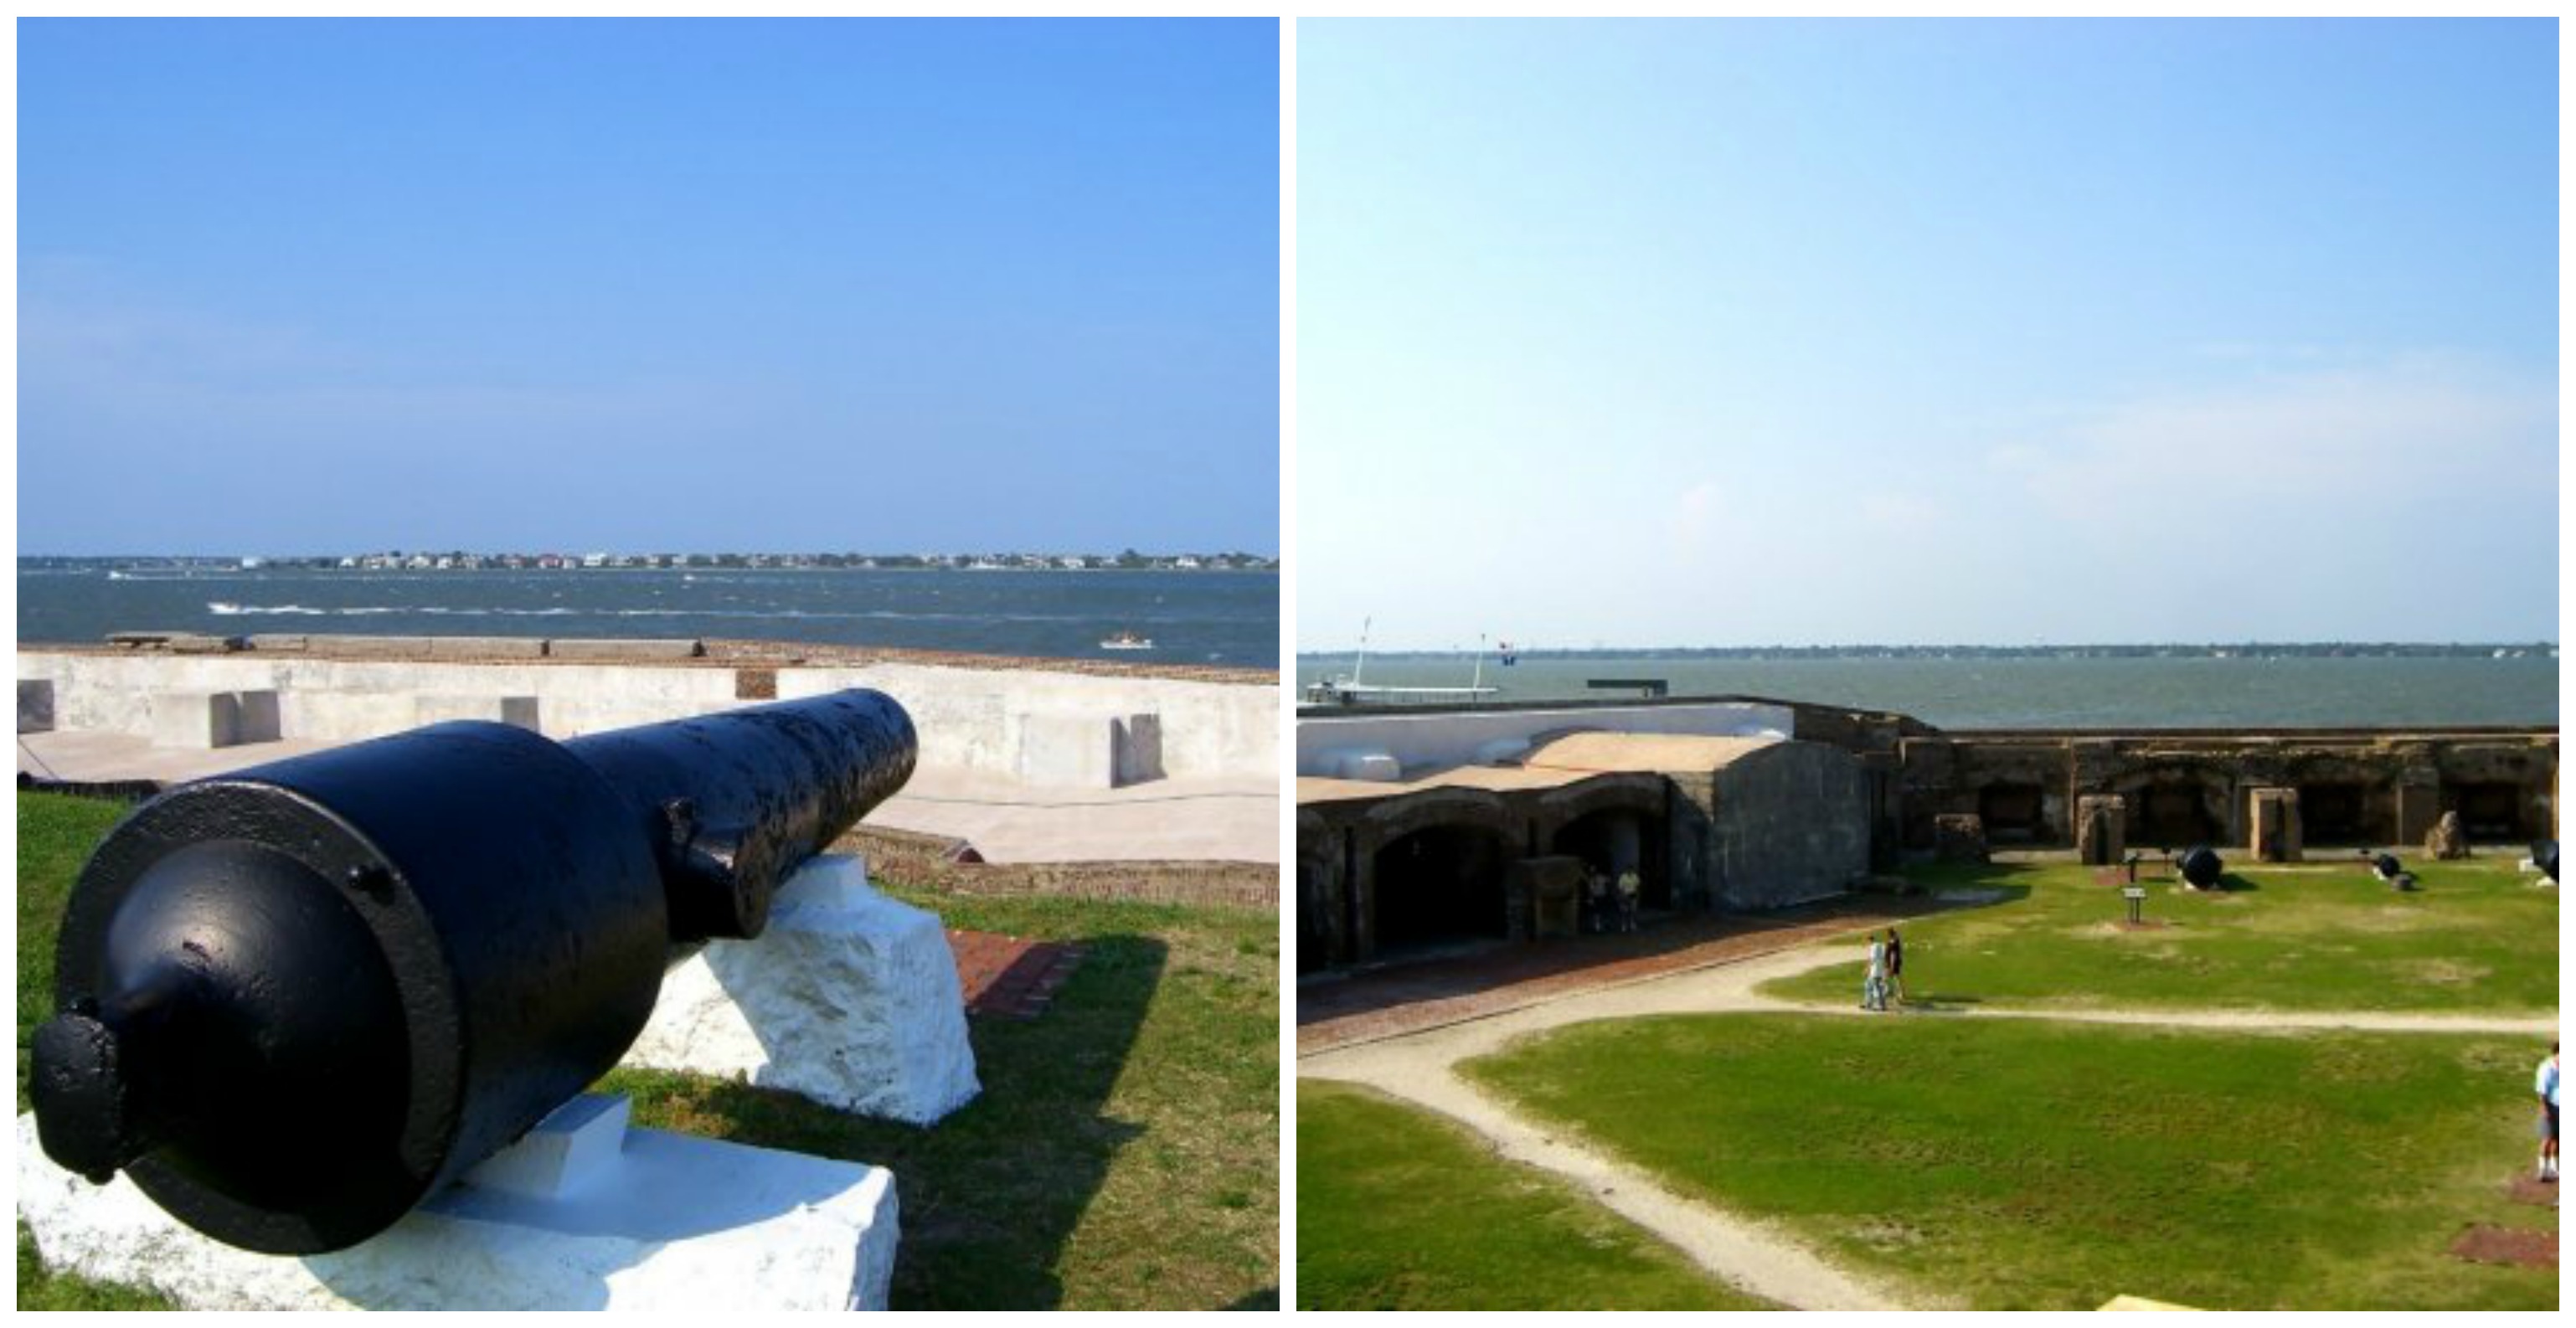 ft sumter